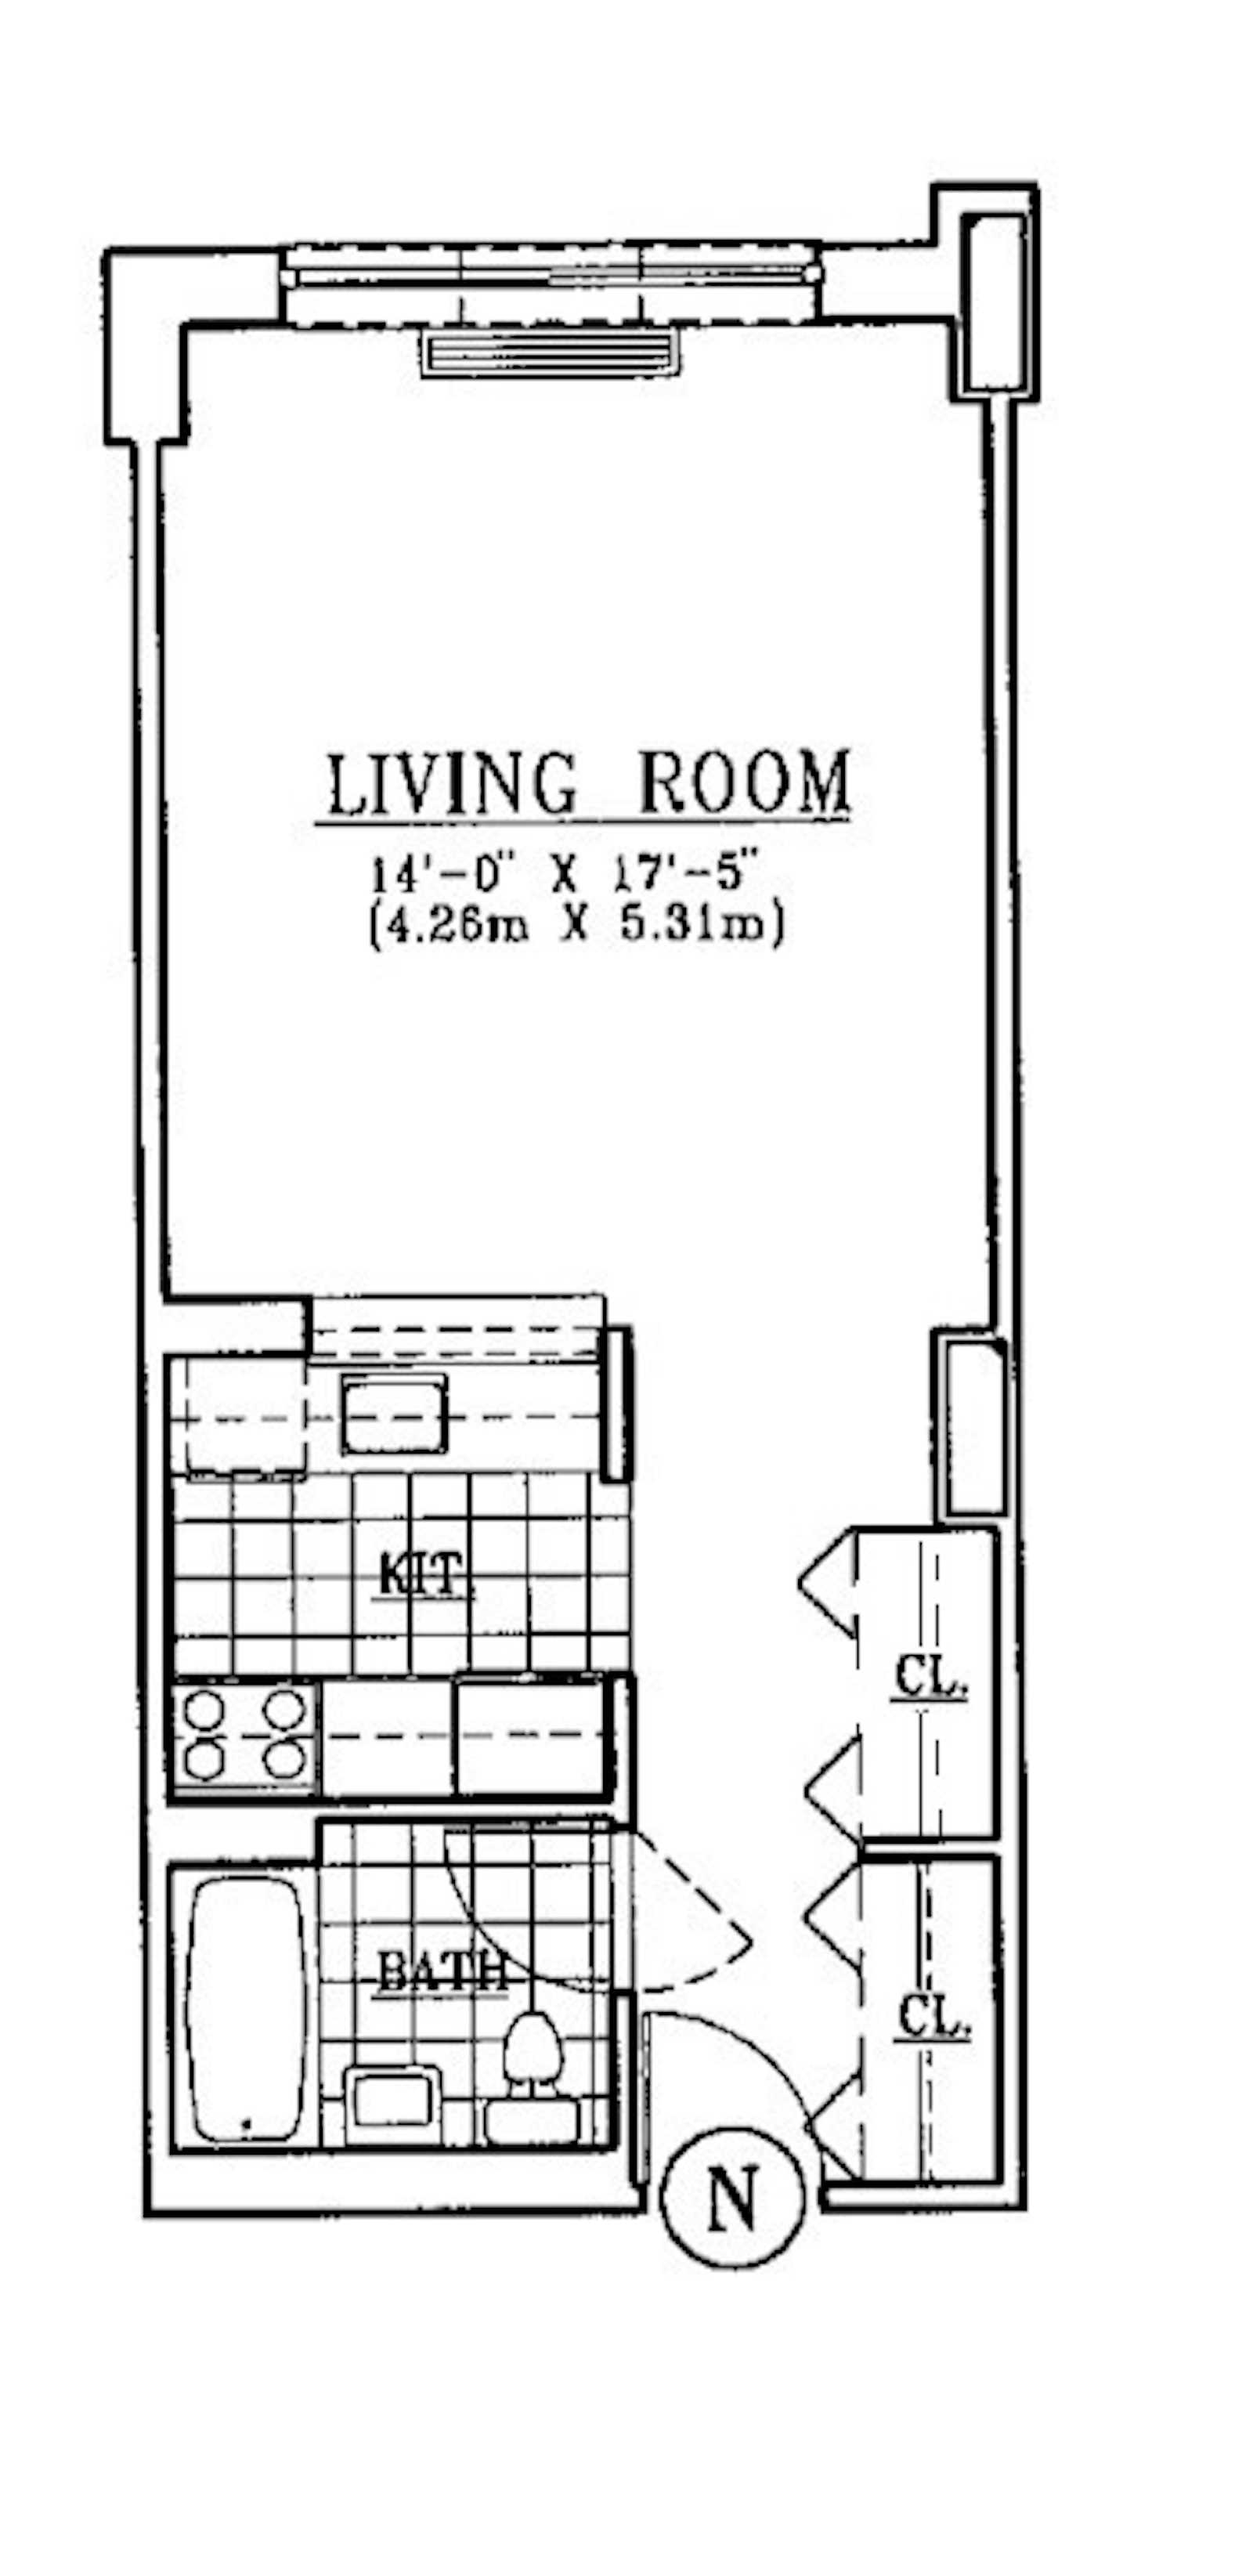 Floorplan for 4-74 48th Ave